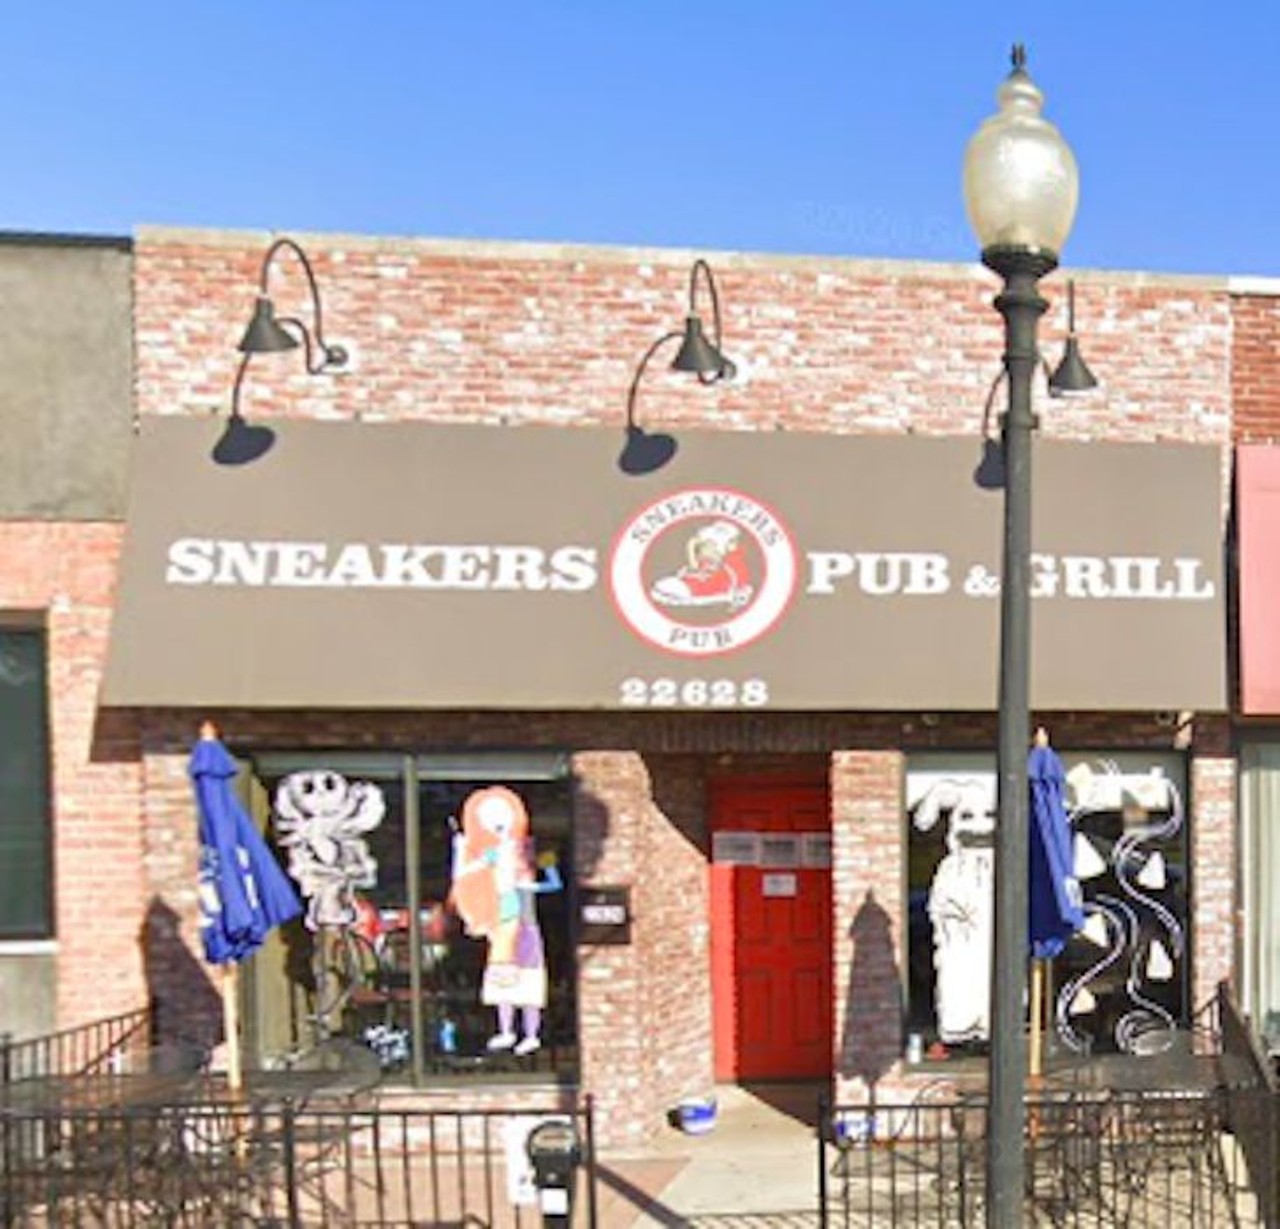 Sneakers Pub
22628 Woodward Ave., Ferndale; 248-545-8243
Sneakers Pub has been a popular neighborhood watering hole since 1988. It might be a sports bar, but it also offers karaoke, which means you can get drunk and sing &#147;Don&#146;t Stop Believin&#148; to your heart&#146;s content.
Photo via Google Maps